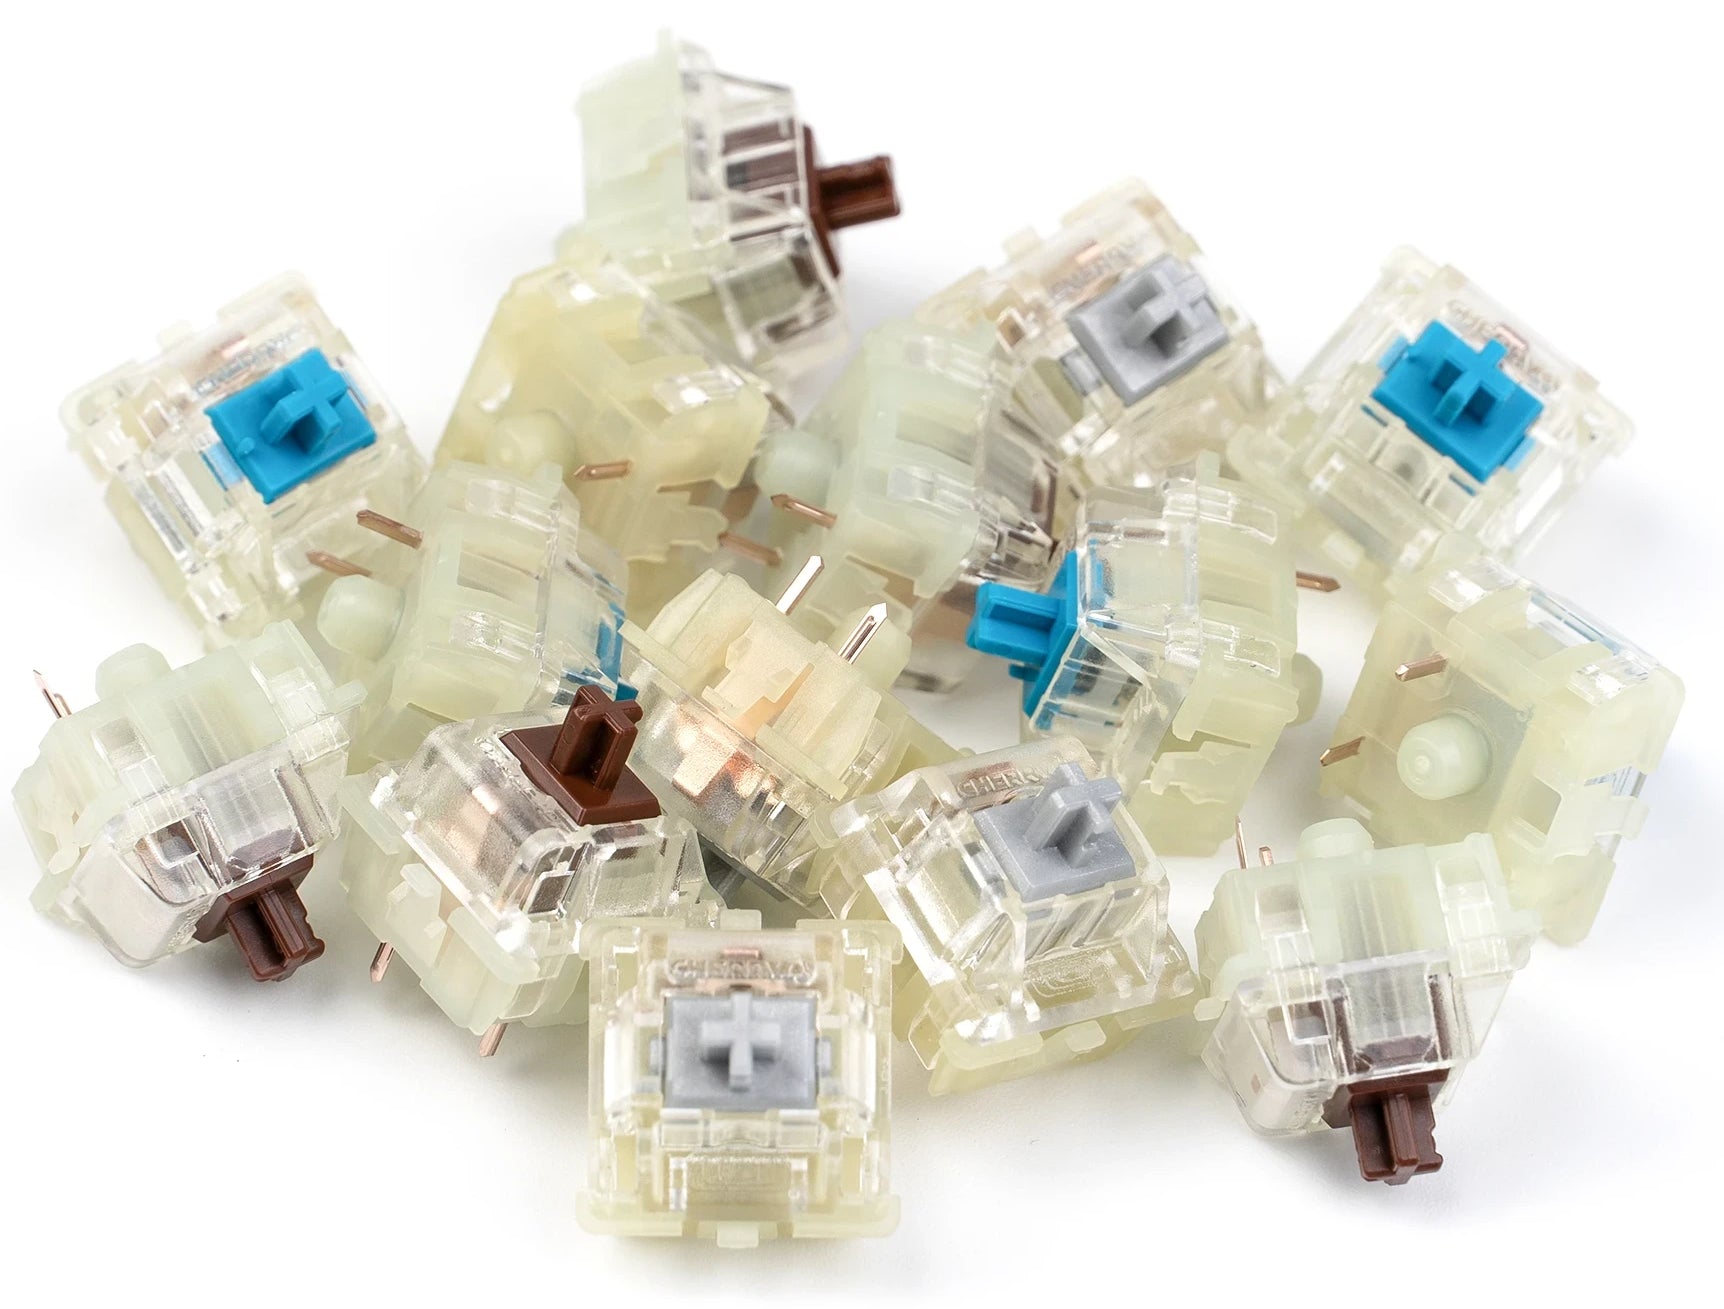 cherrry mx switches red blue brown 